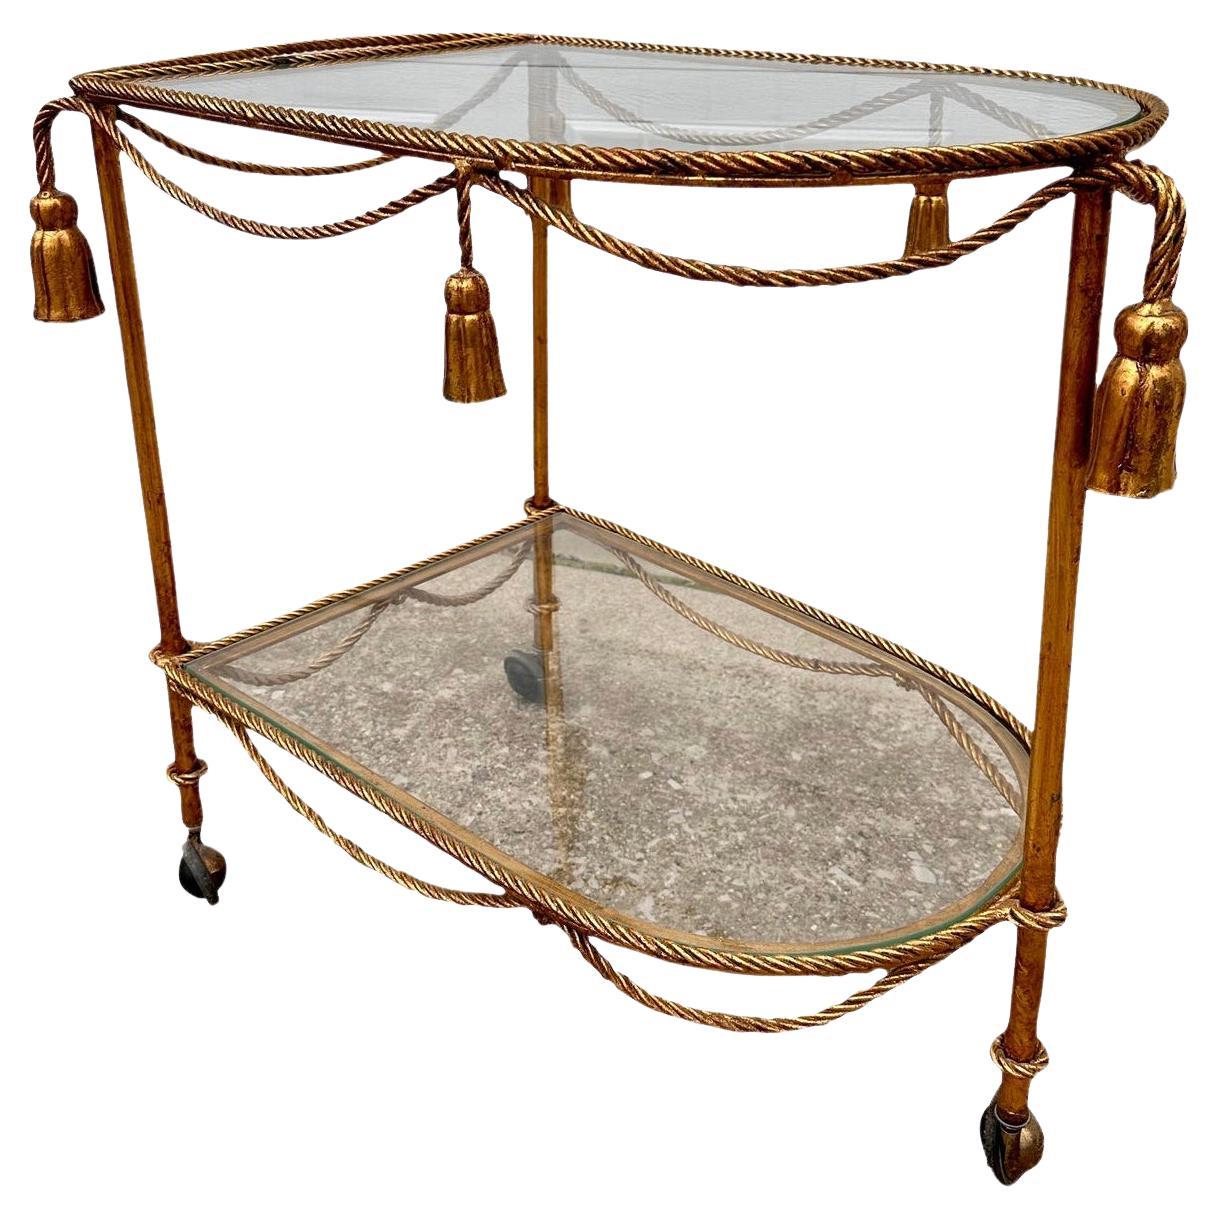 1950s Italian Gilded Two Tiered Bar Cart Hollywood Regency Style with Tassels